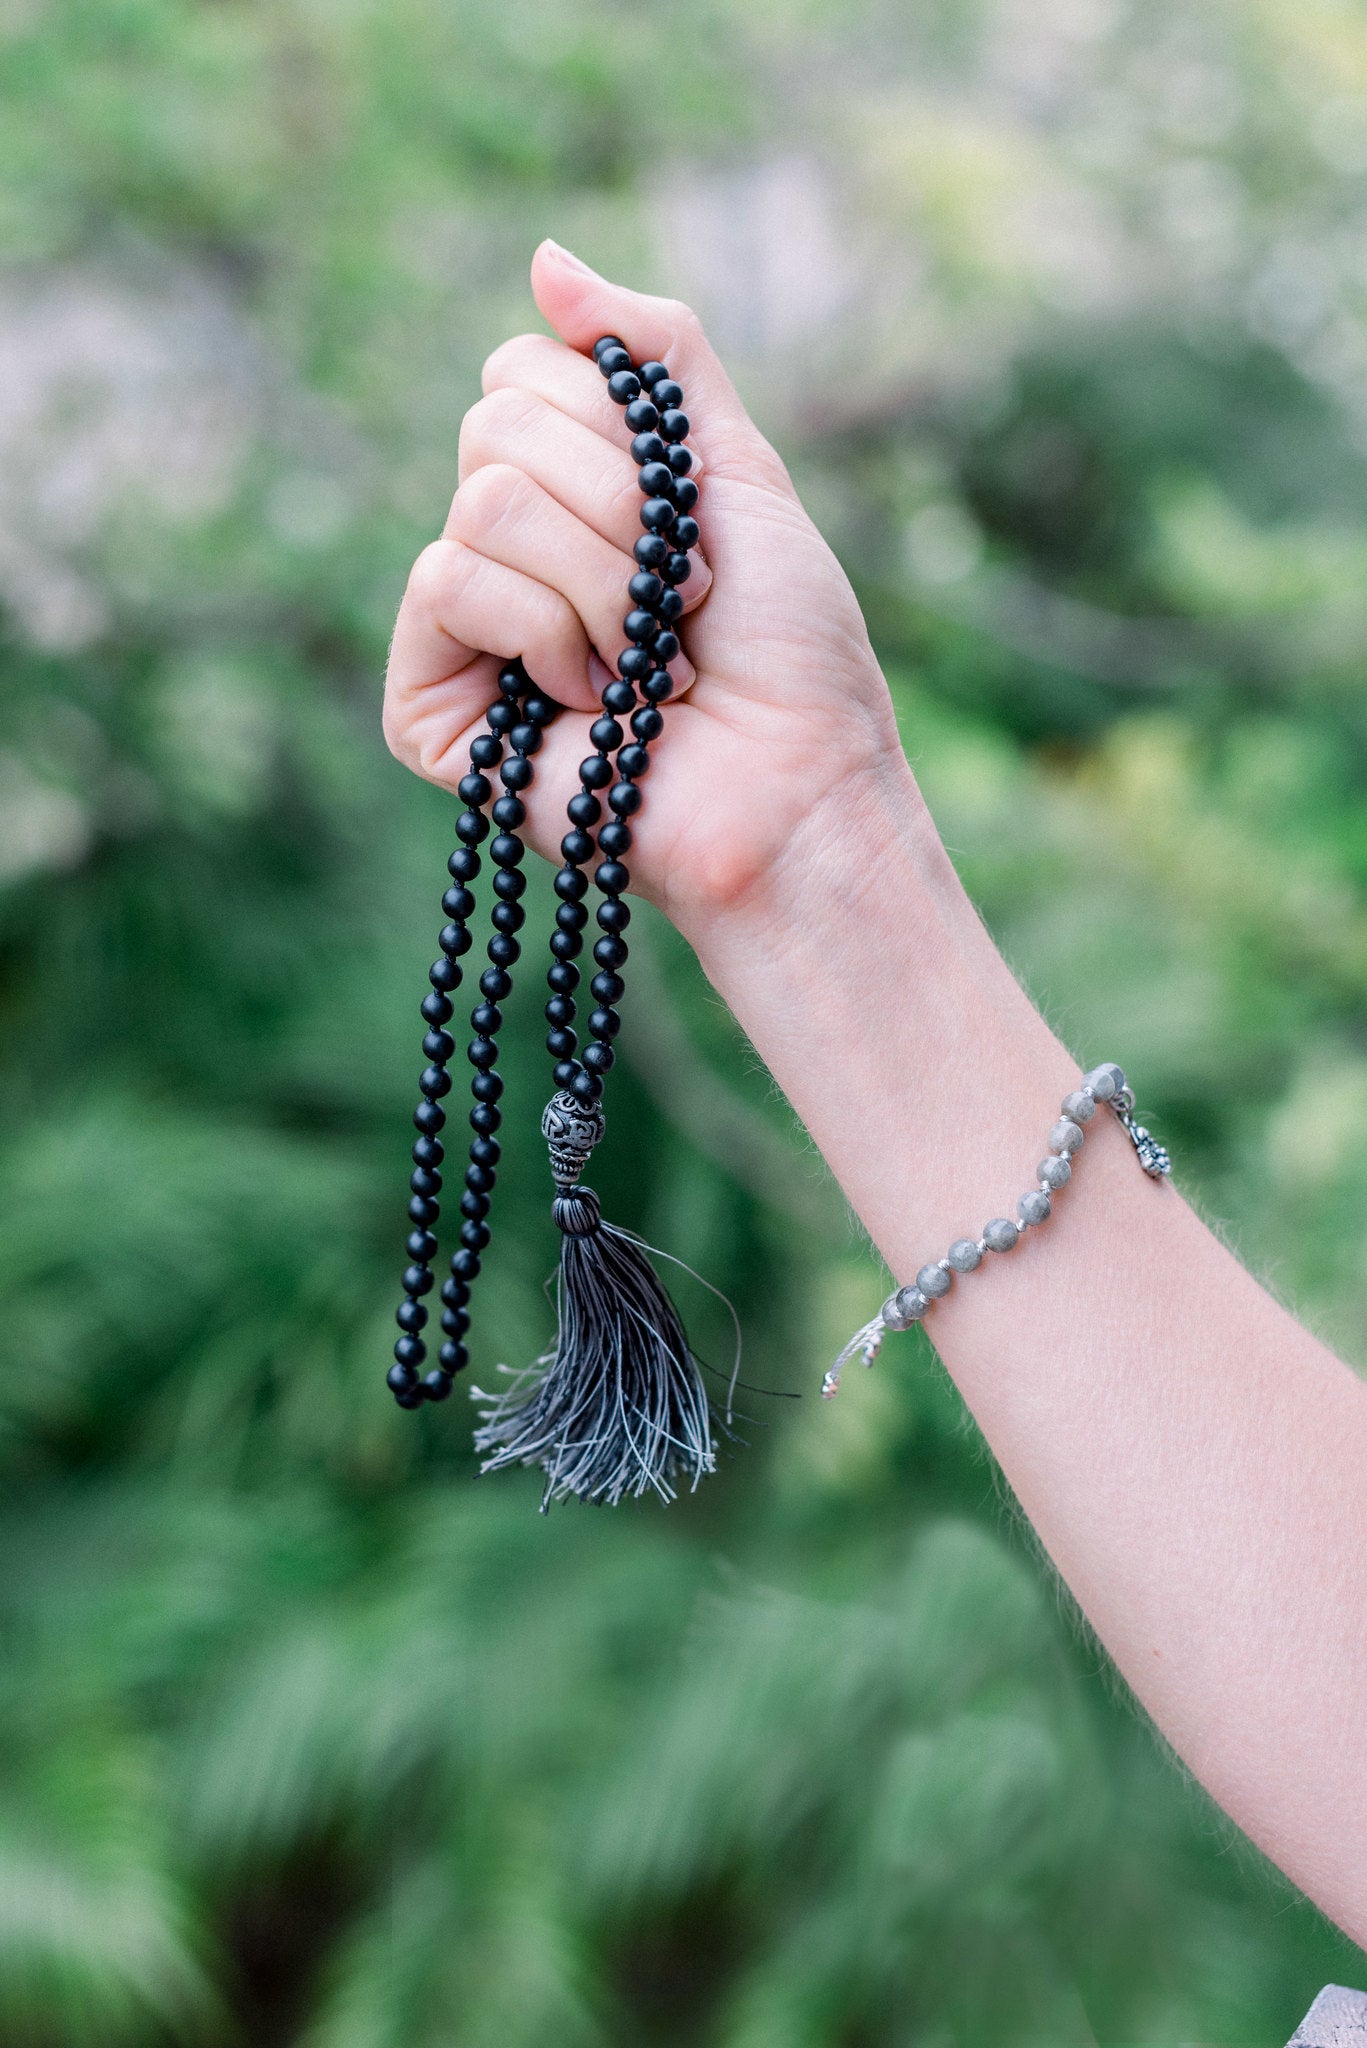 PROTECTION: Black Agate 108 Bead Hand-knotted Mala Necklace